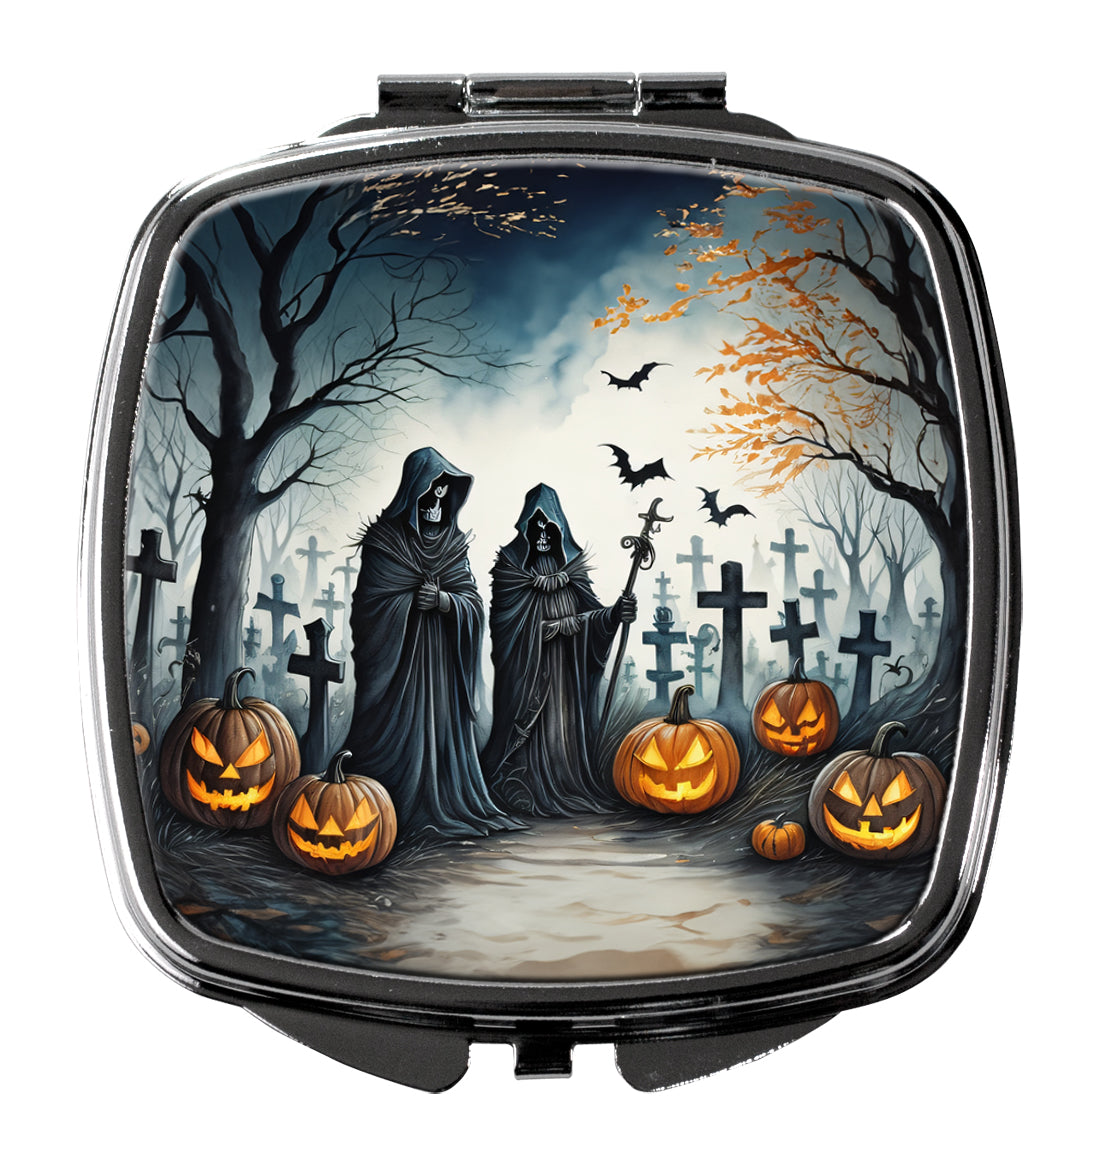 Buy this The Grim Reaper Spooky Halloween Compact Mirror